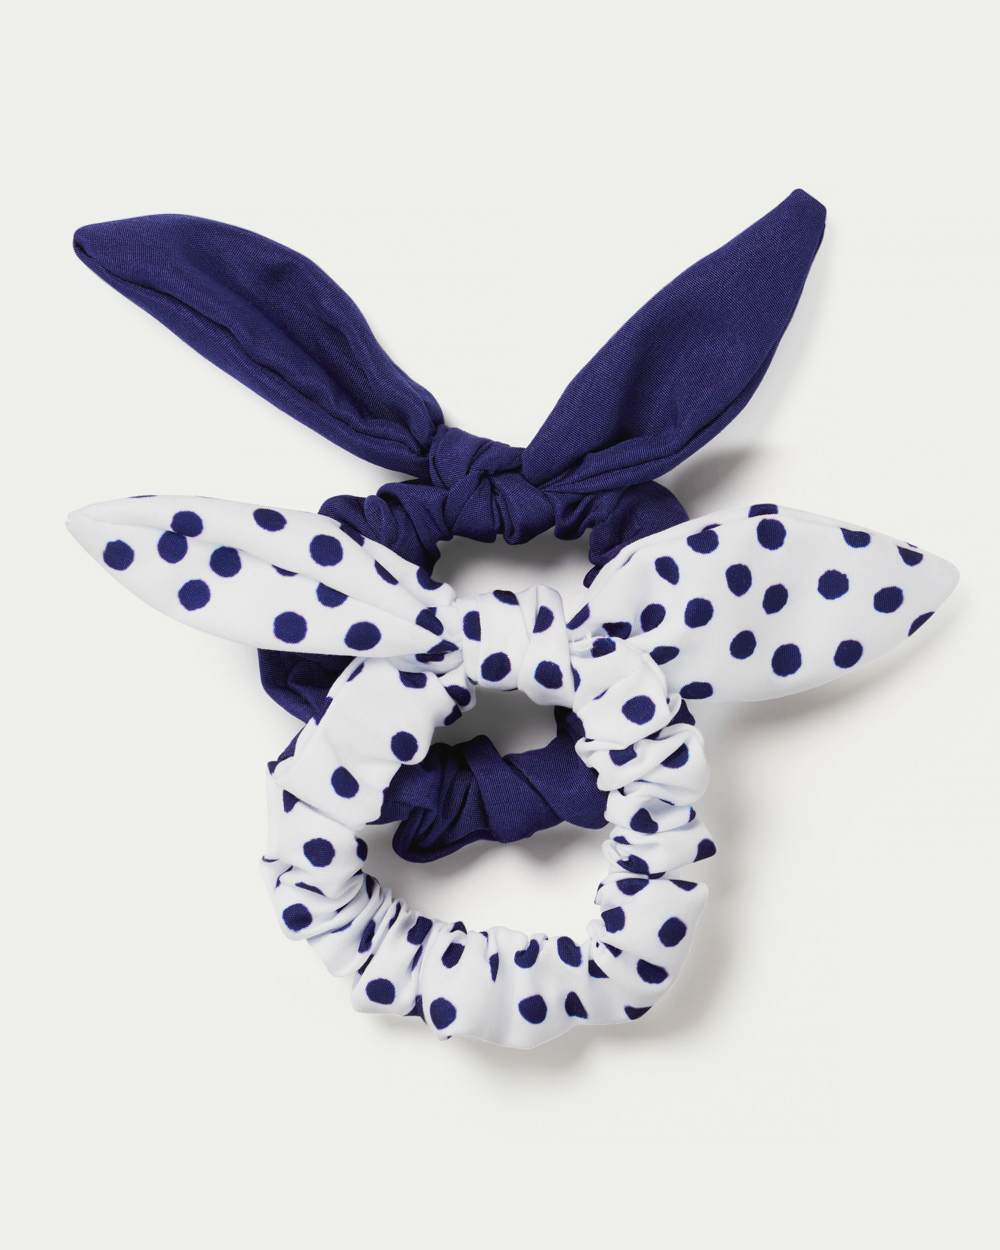 Spot Bow & Plain Bow Scrunchie 2 Pack - Navy - Small Stuff Accessories